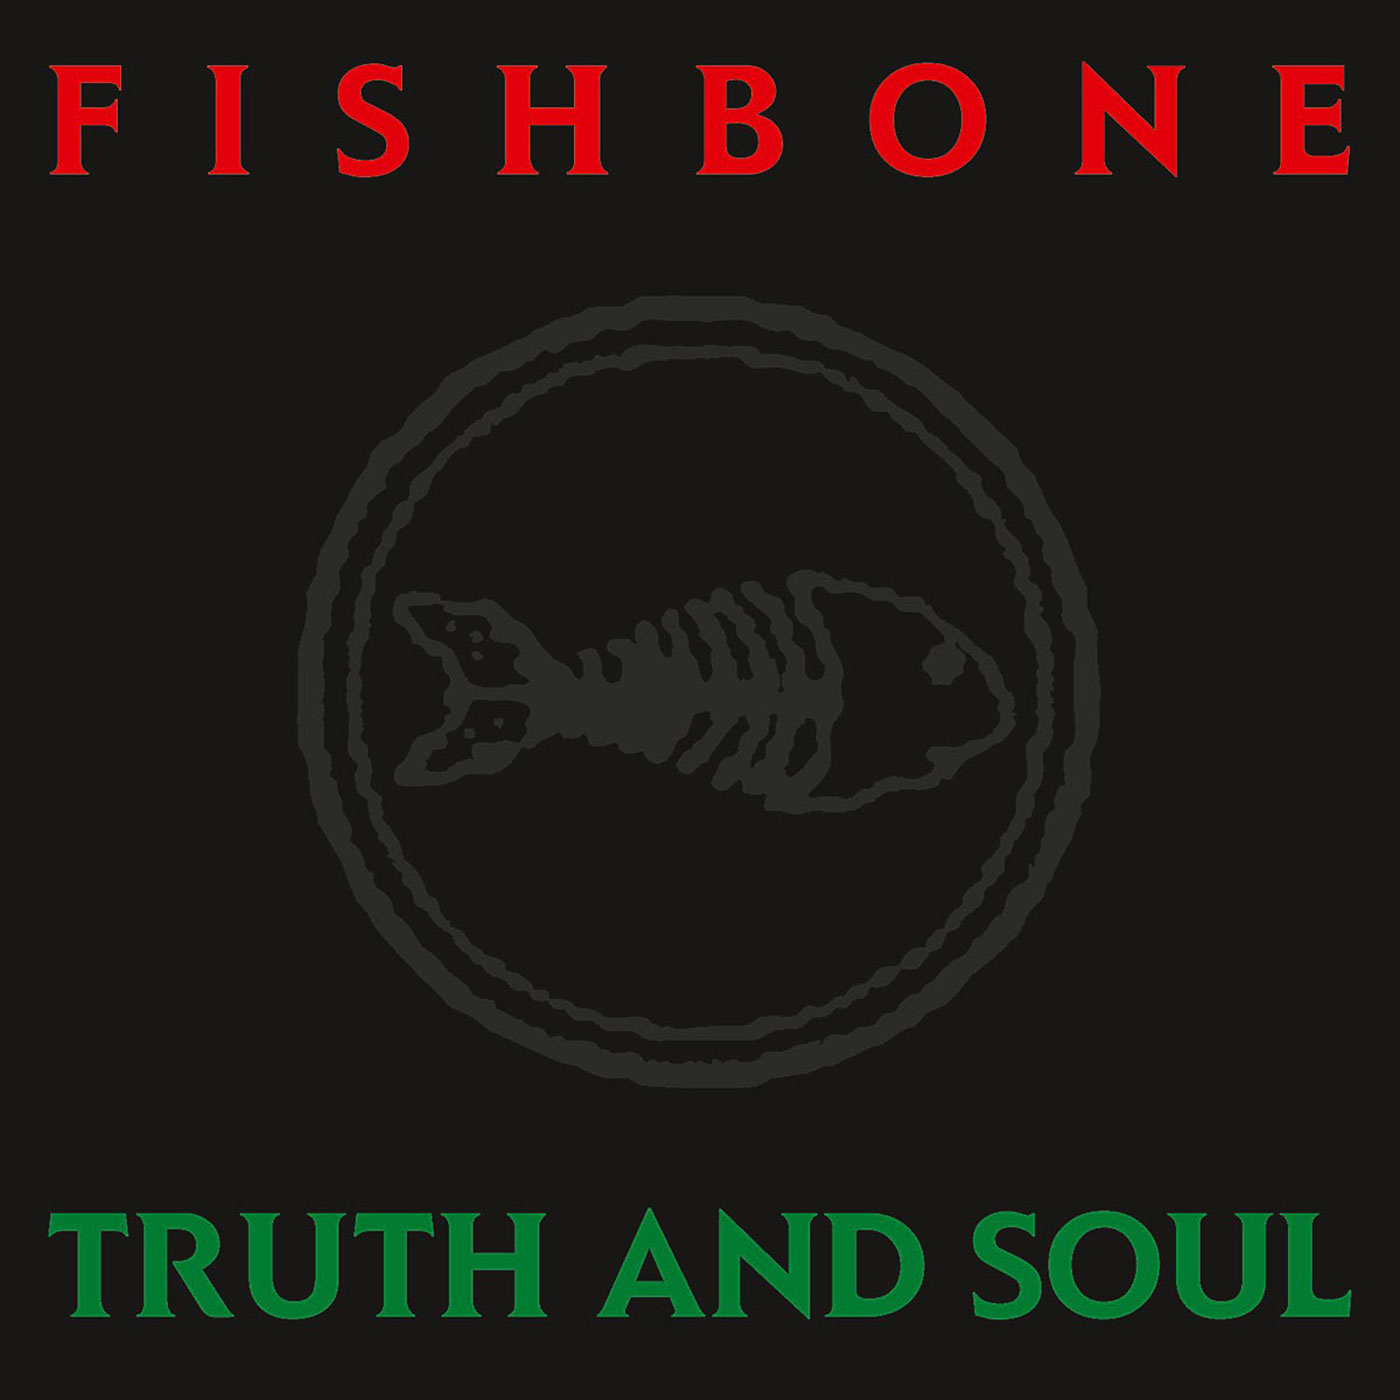 614 Fishbone – Truth and Soul